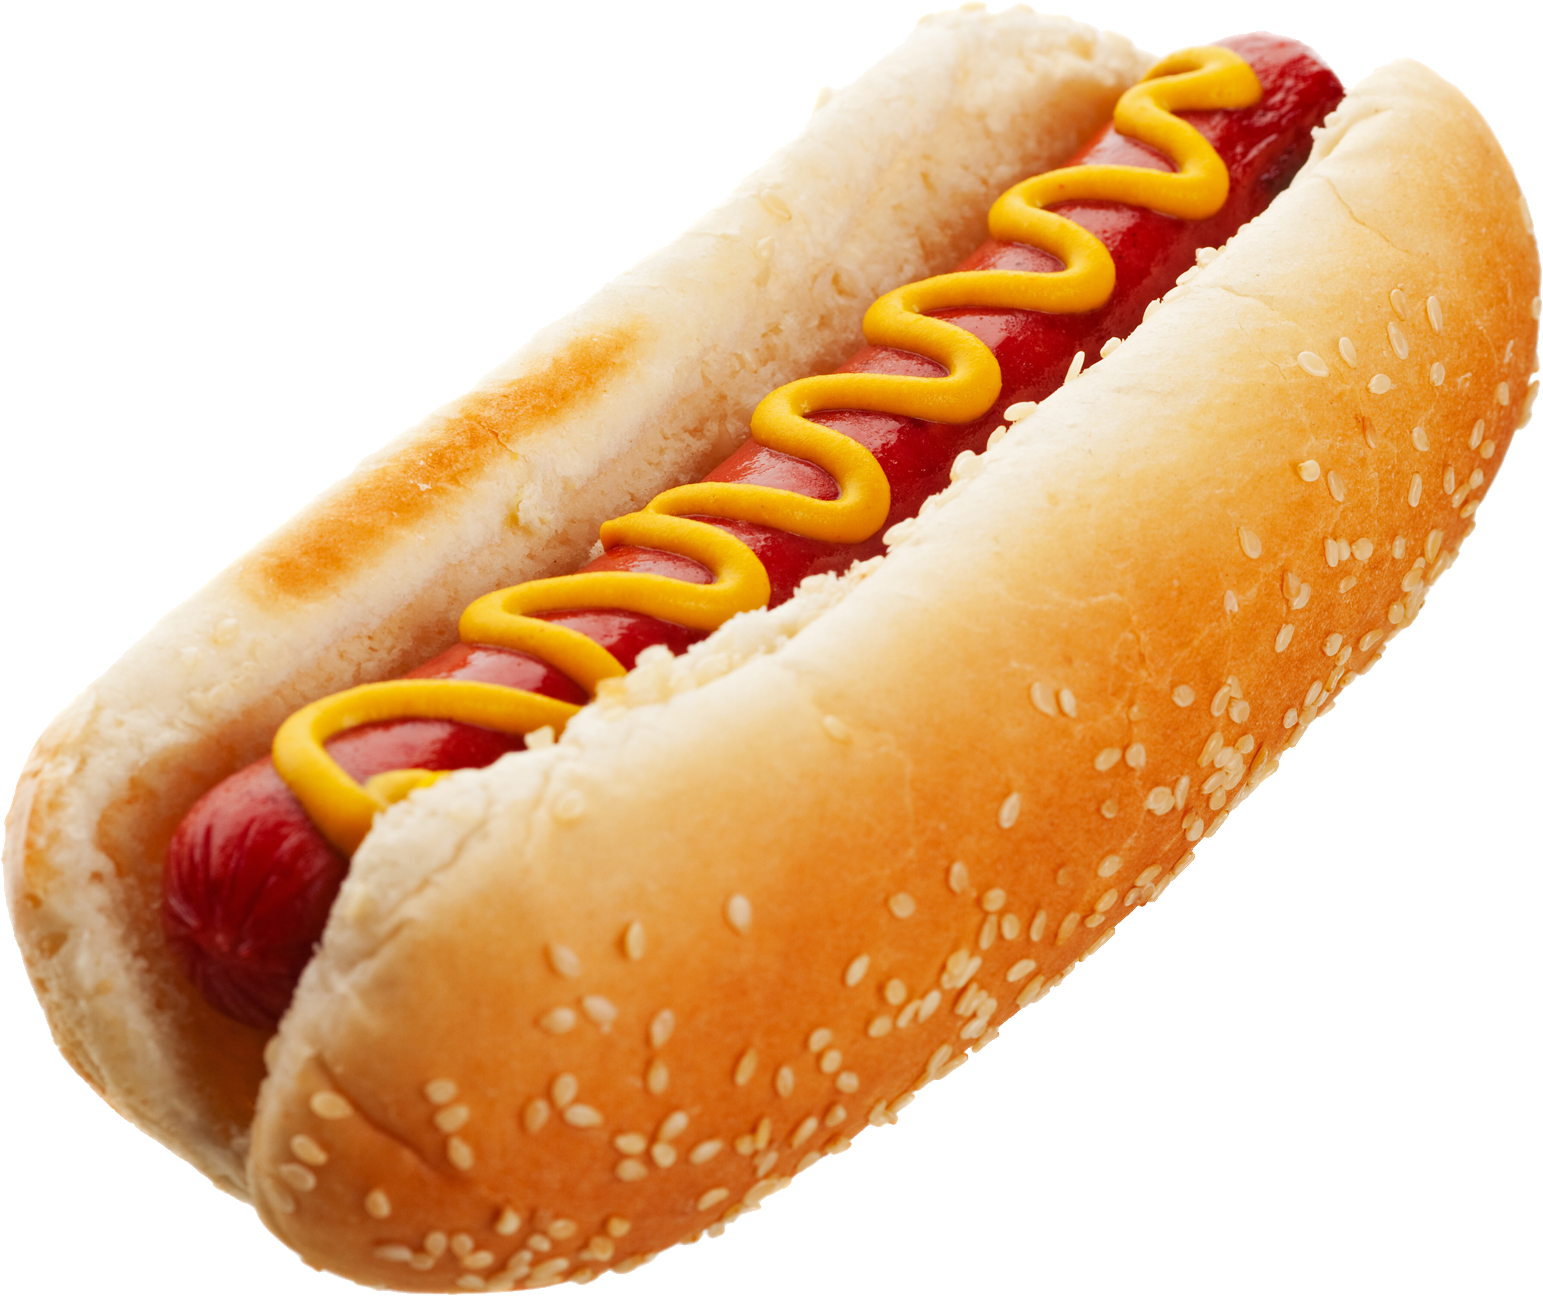 Hot Dog PNG High-Quality Image